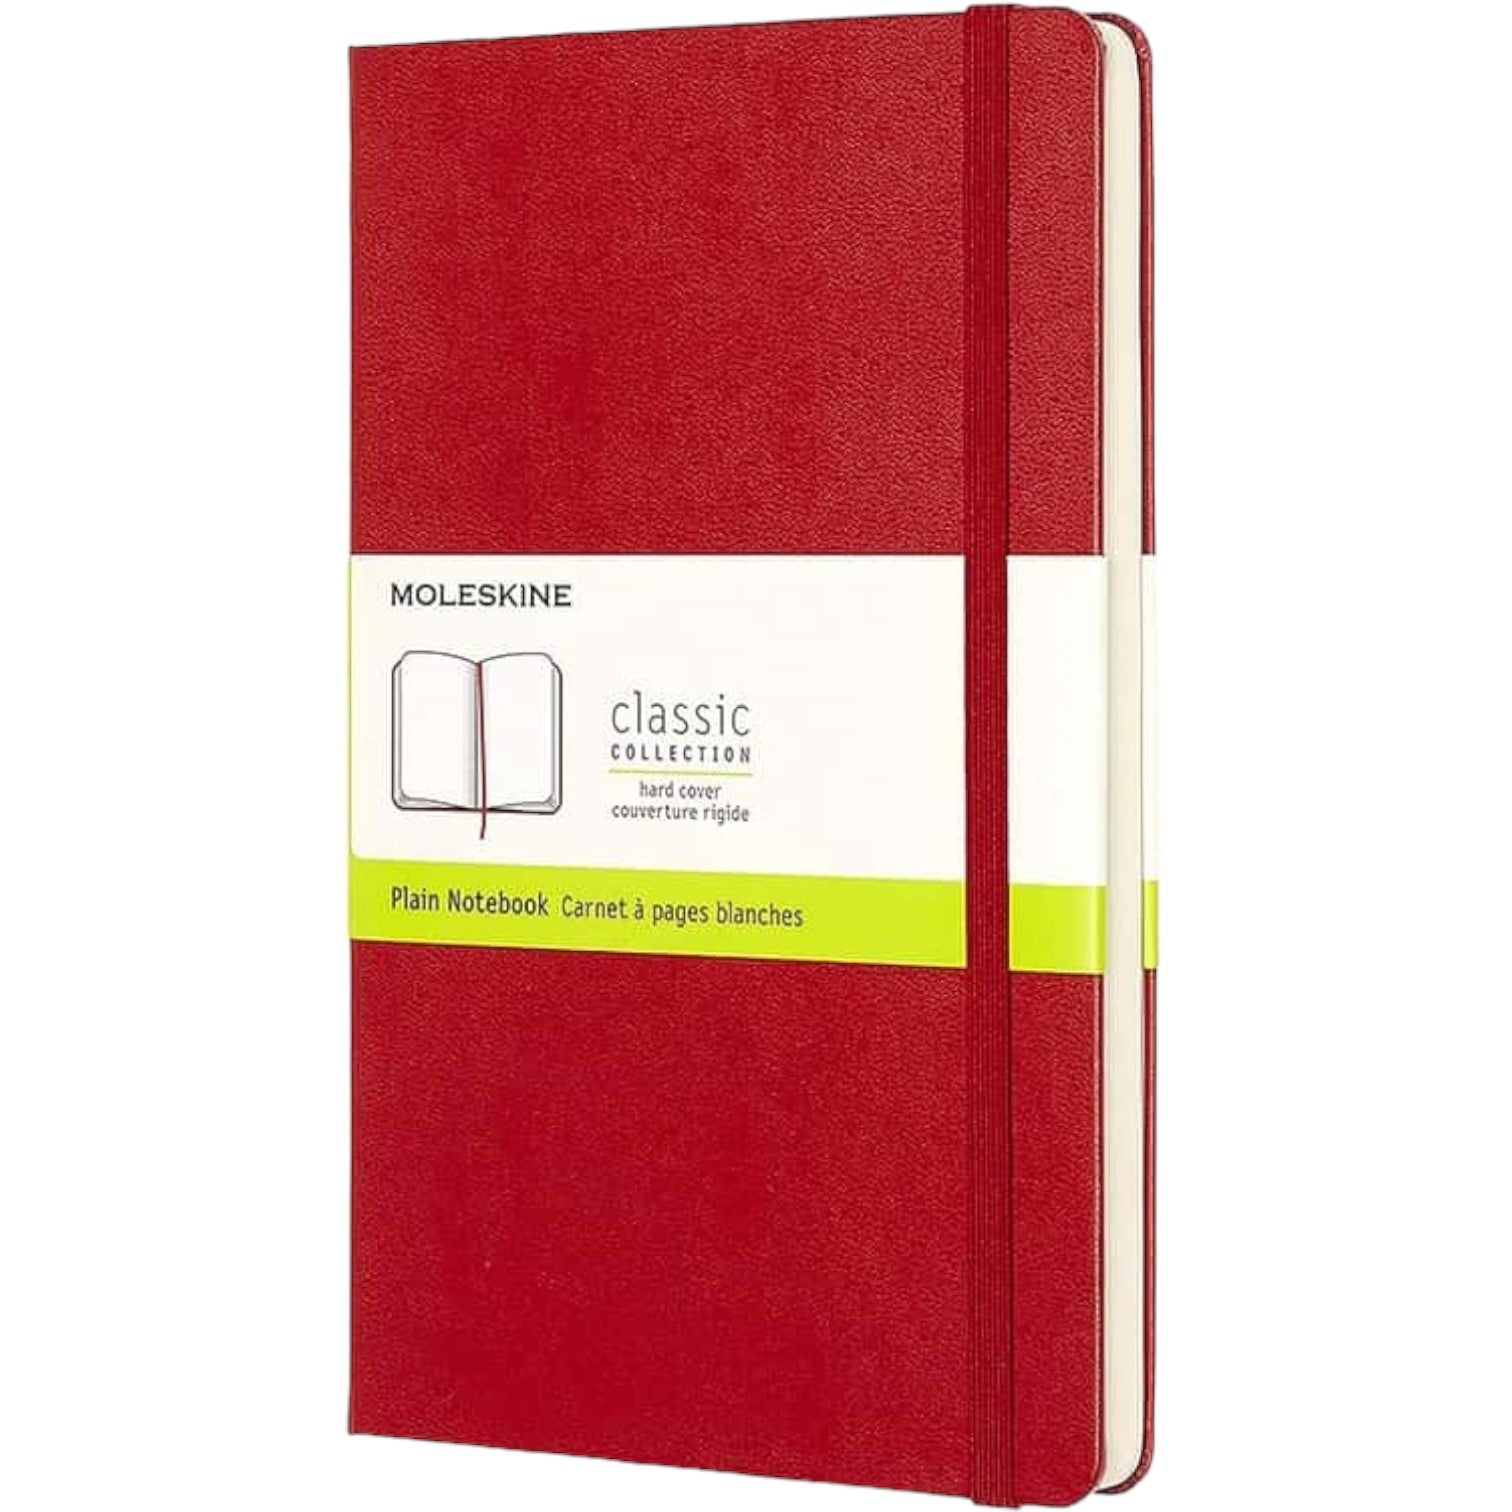 Large Ruled Hard Cover Notebook - Scarlet Red